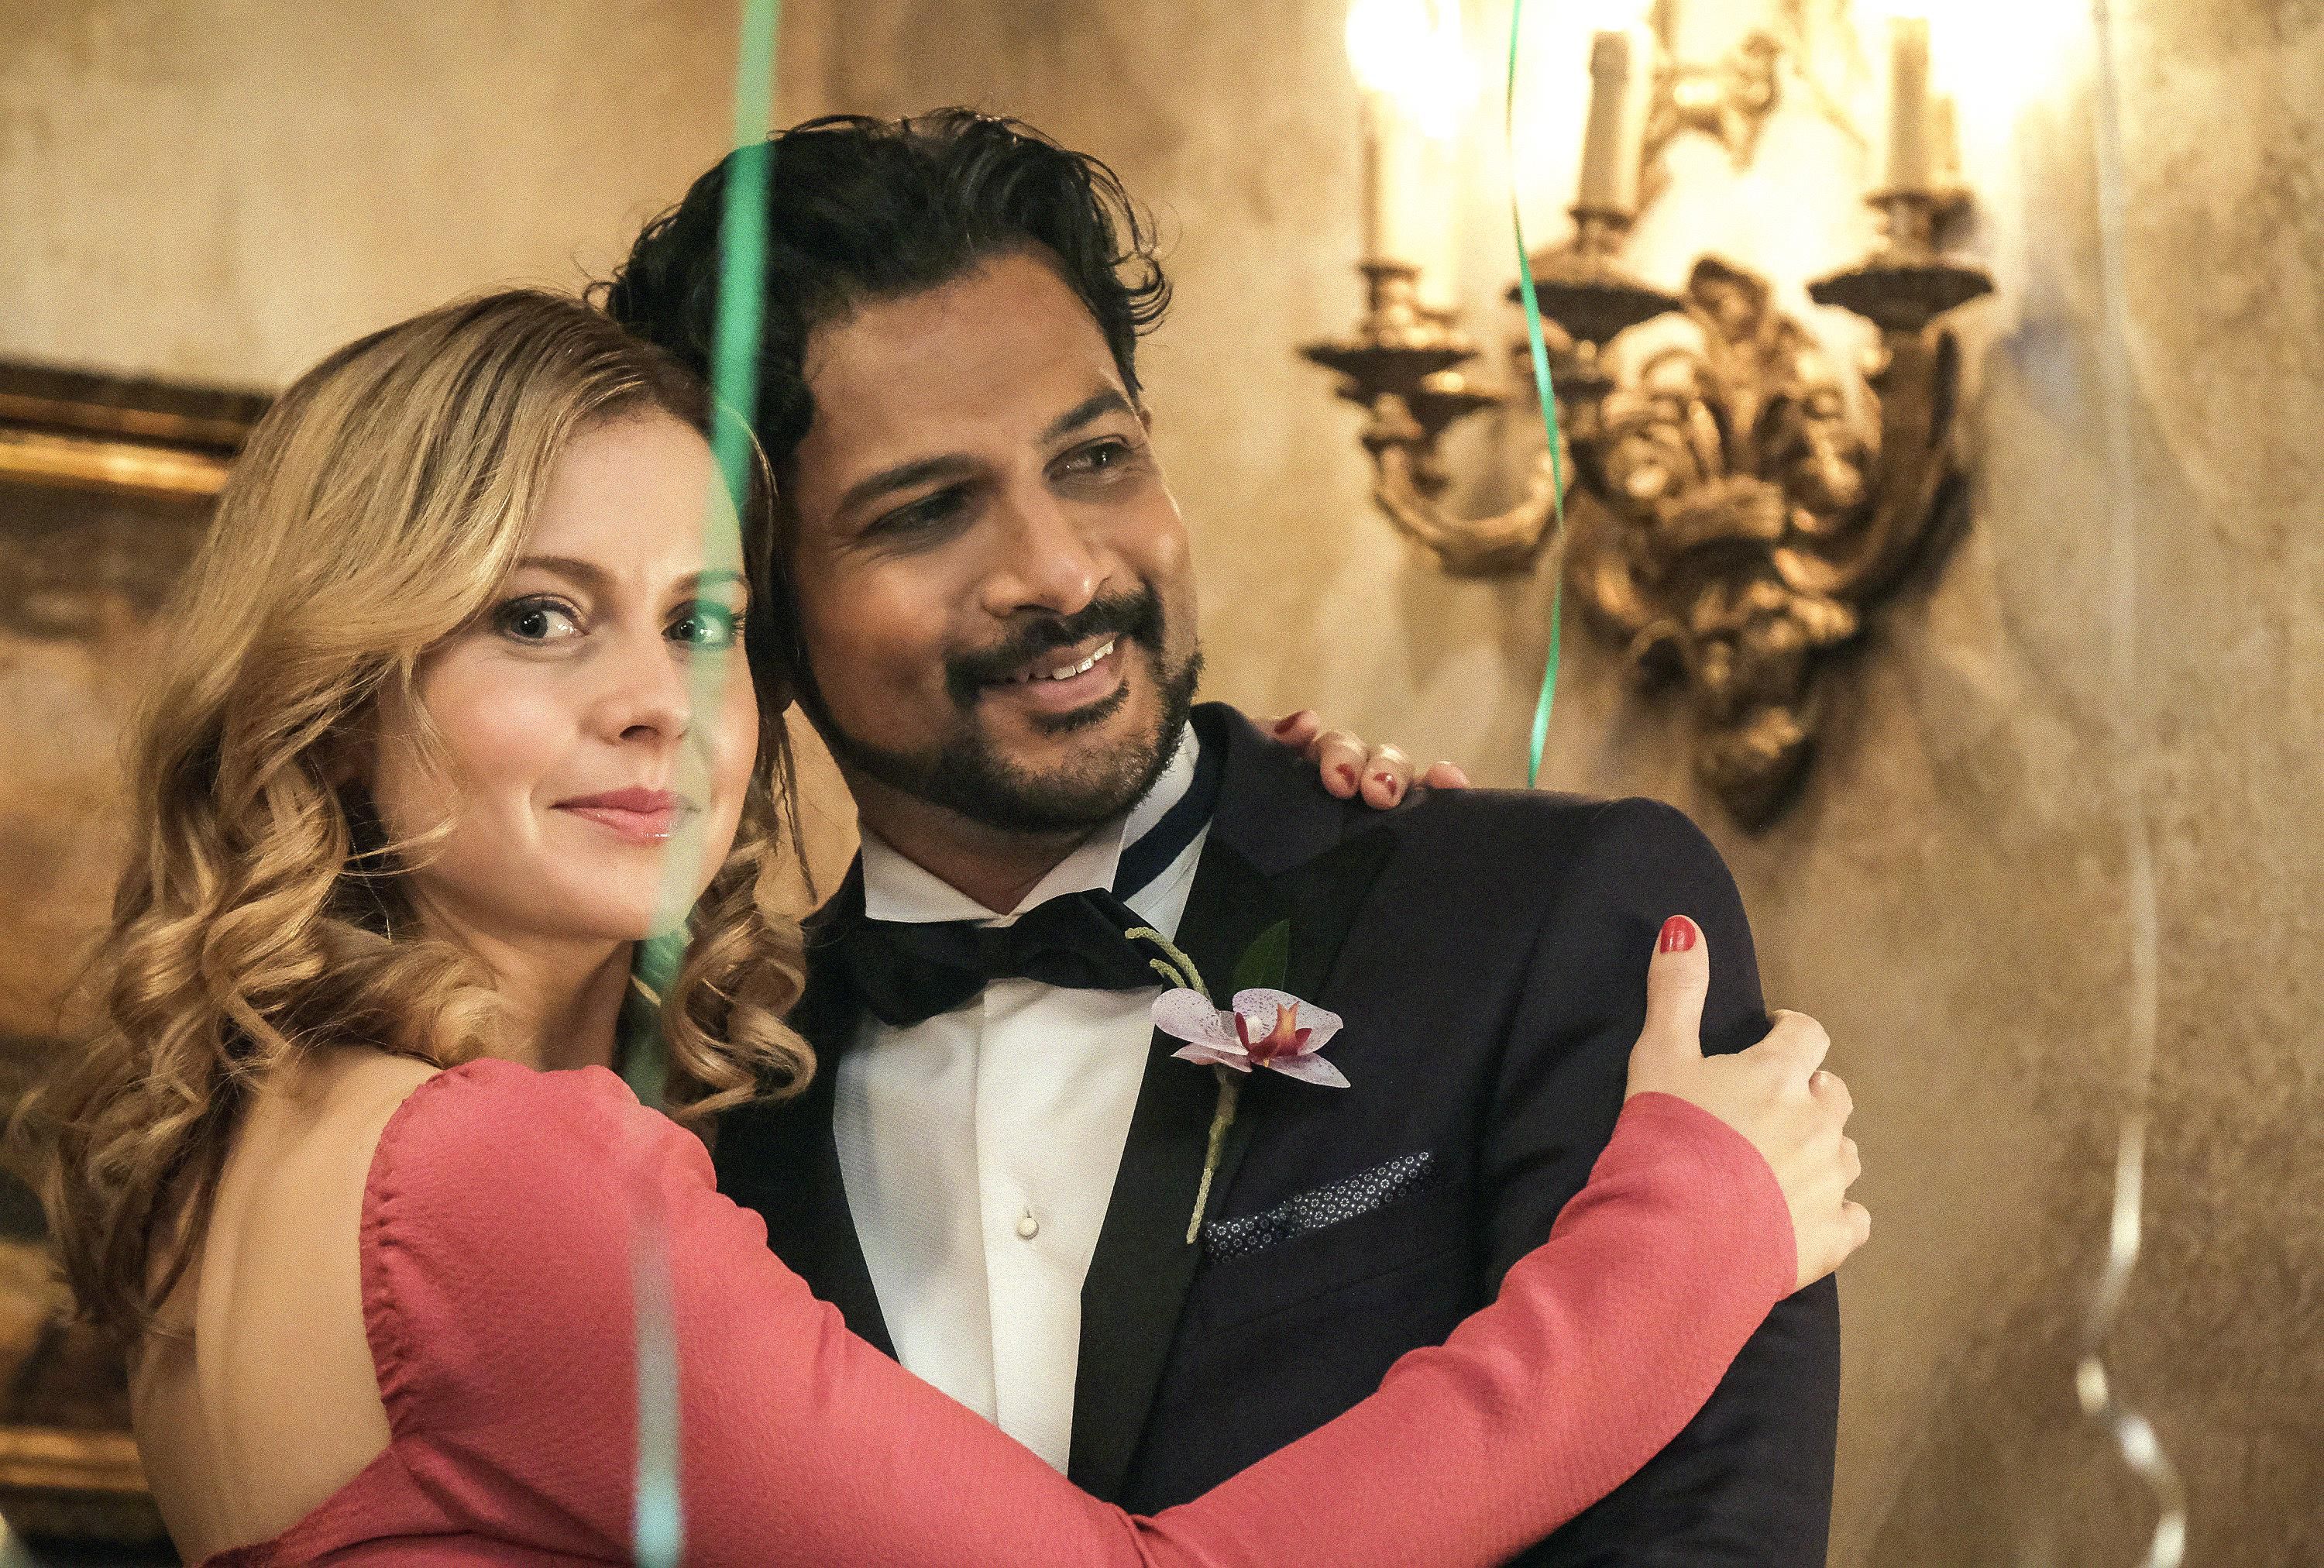 Rose McIver as Samantha wears a salmon pink dress and puts her arms around a tuxedo clad Utkarsh Ambudkar as Jay in Ghosts